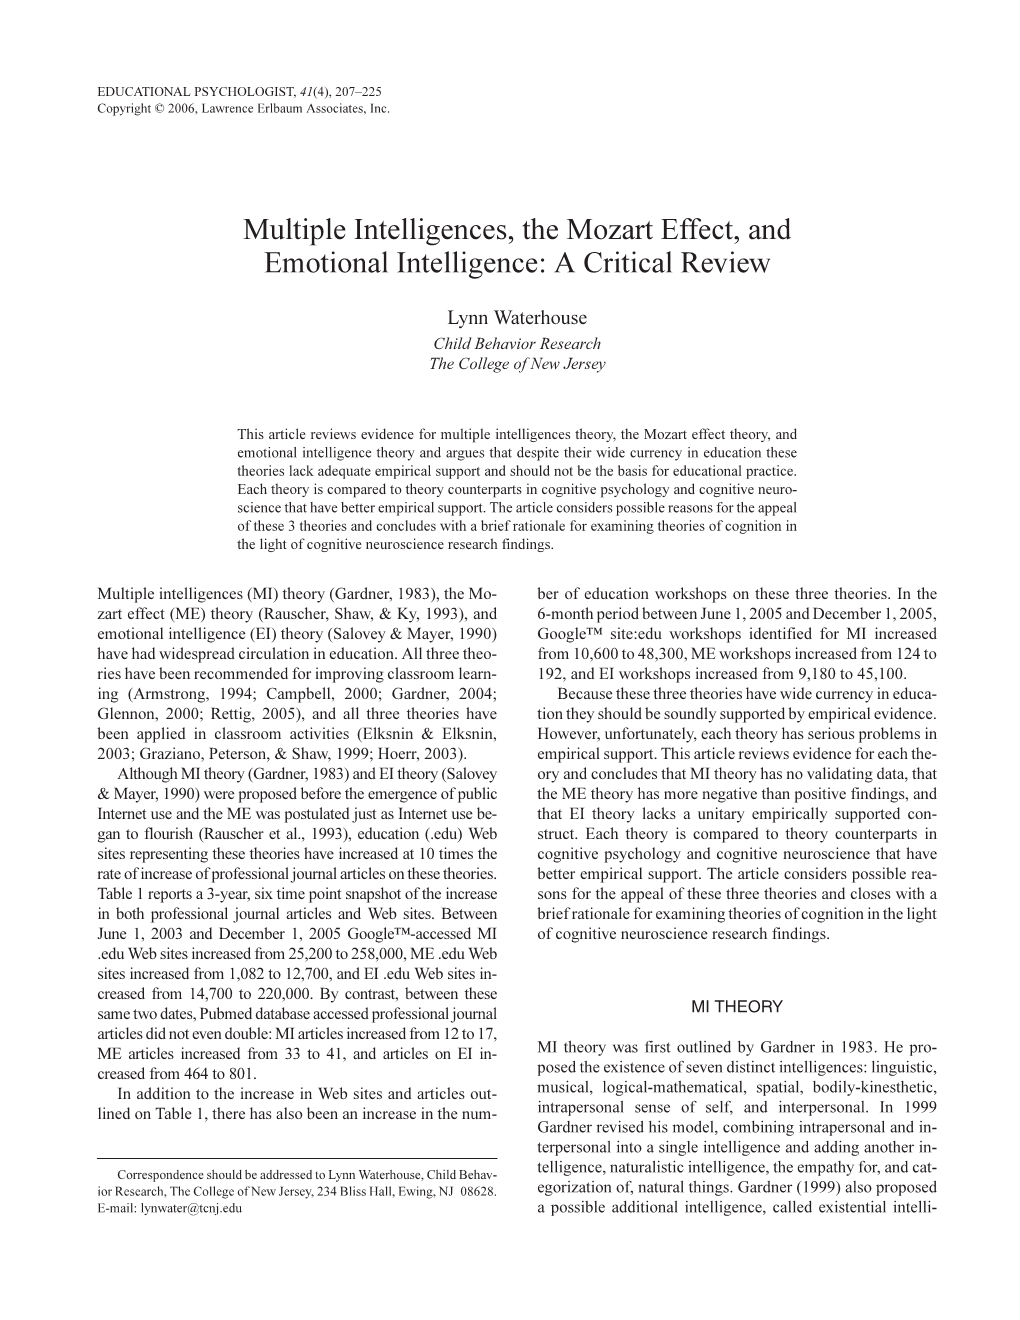 Multiple Intelligences, the Mozart Effect, and Emotional Intelligence: a Critical Review